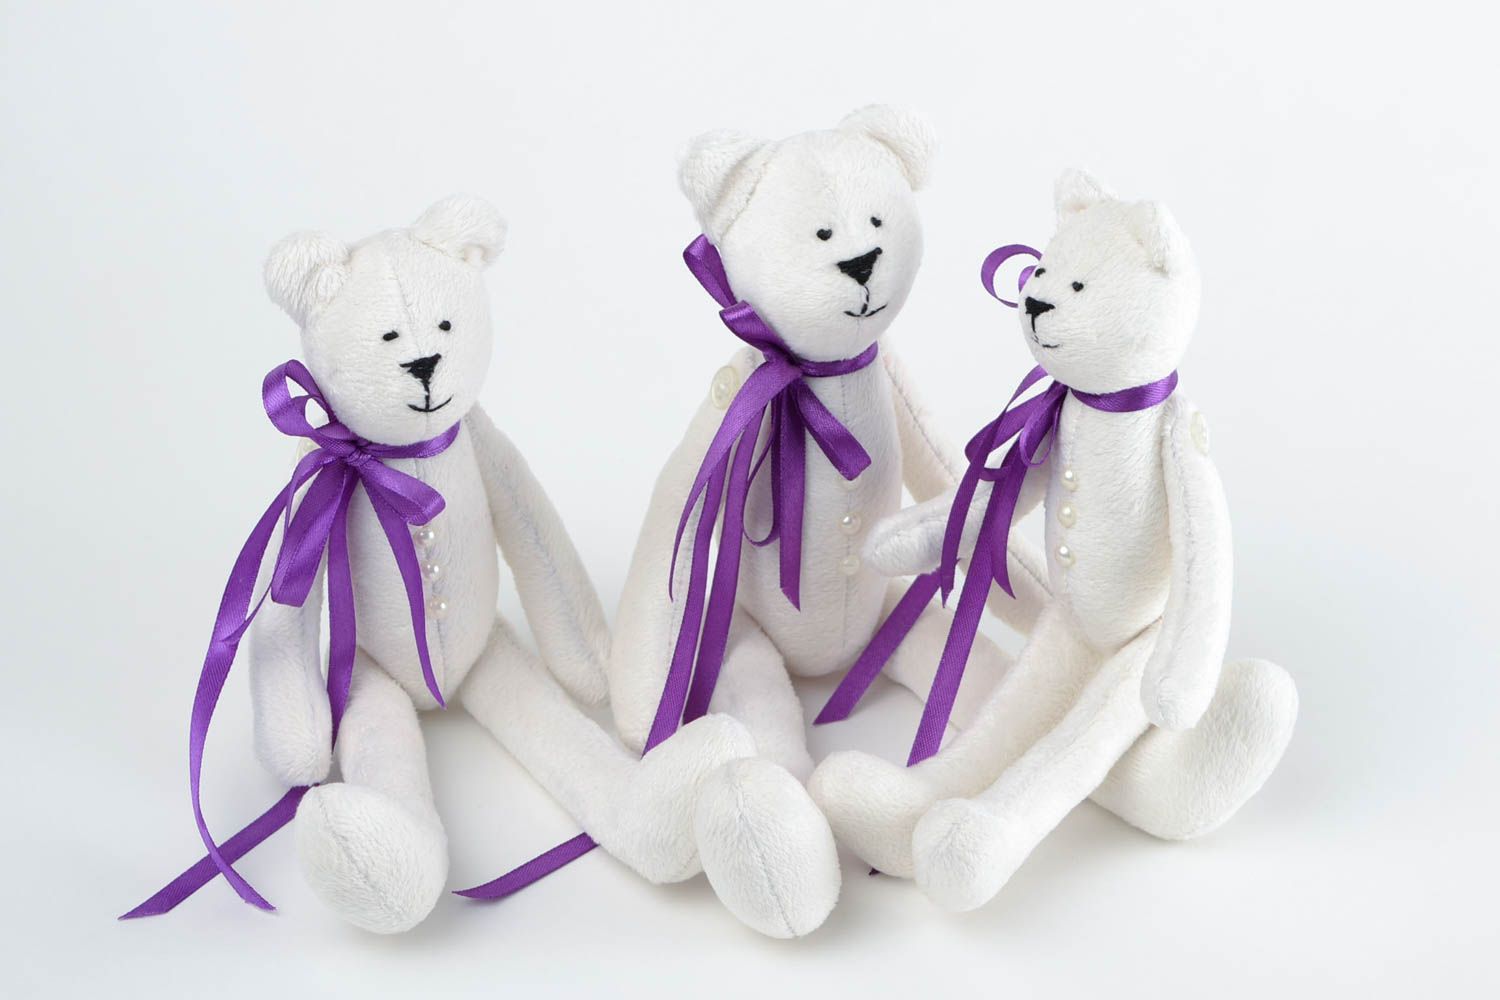 Handmade toys bear toys housewarming gift ideas cool gifts for kids home decor photo 5